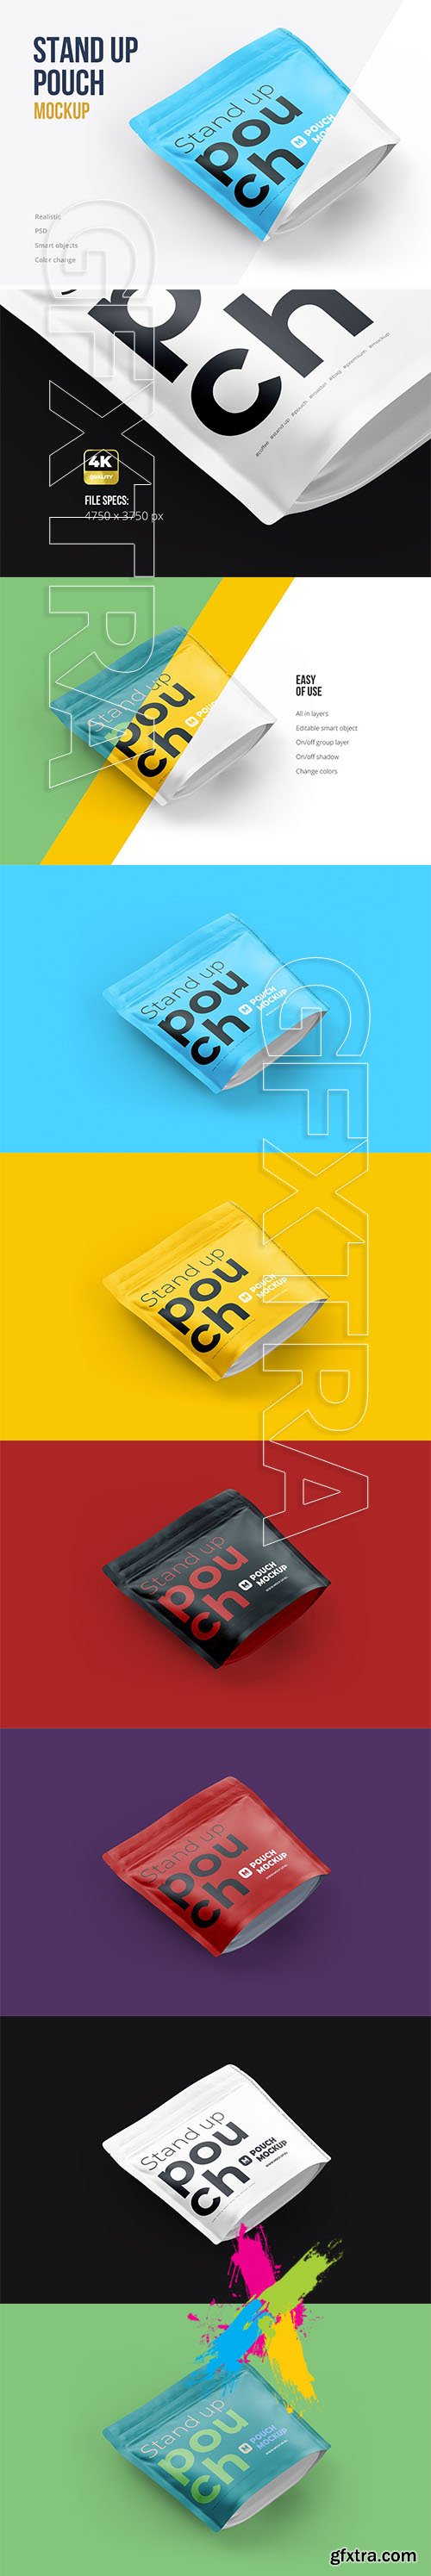 CreativeMarket - Stand-up Pouch Mockup (square) 5075208